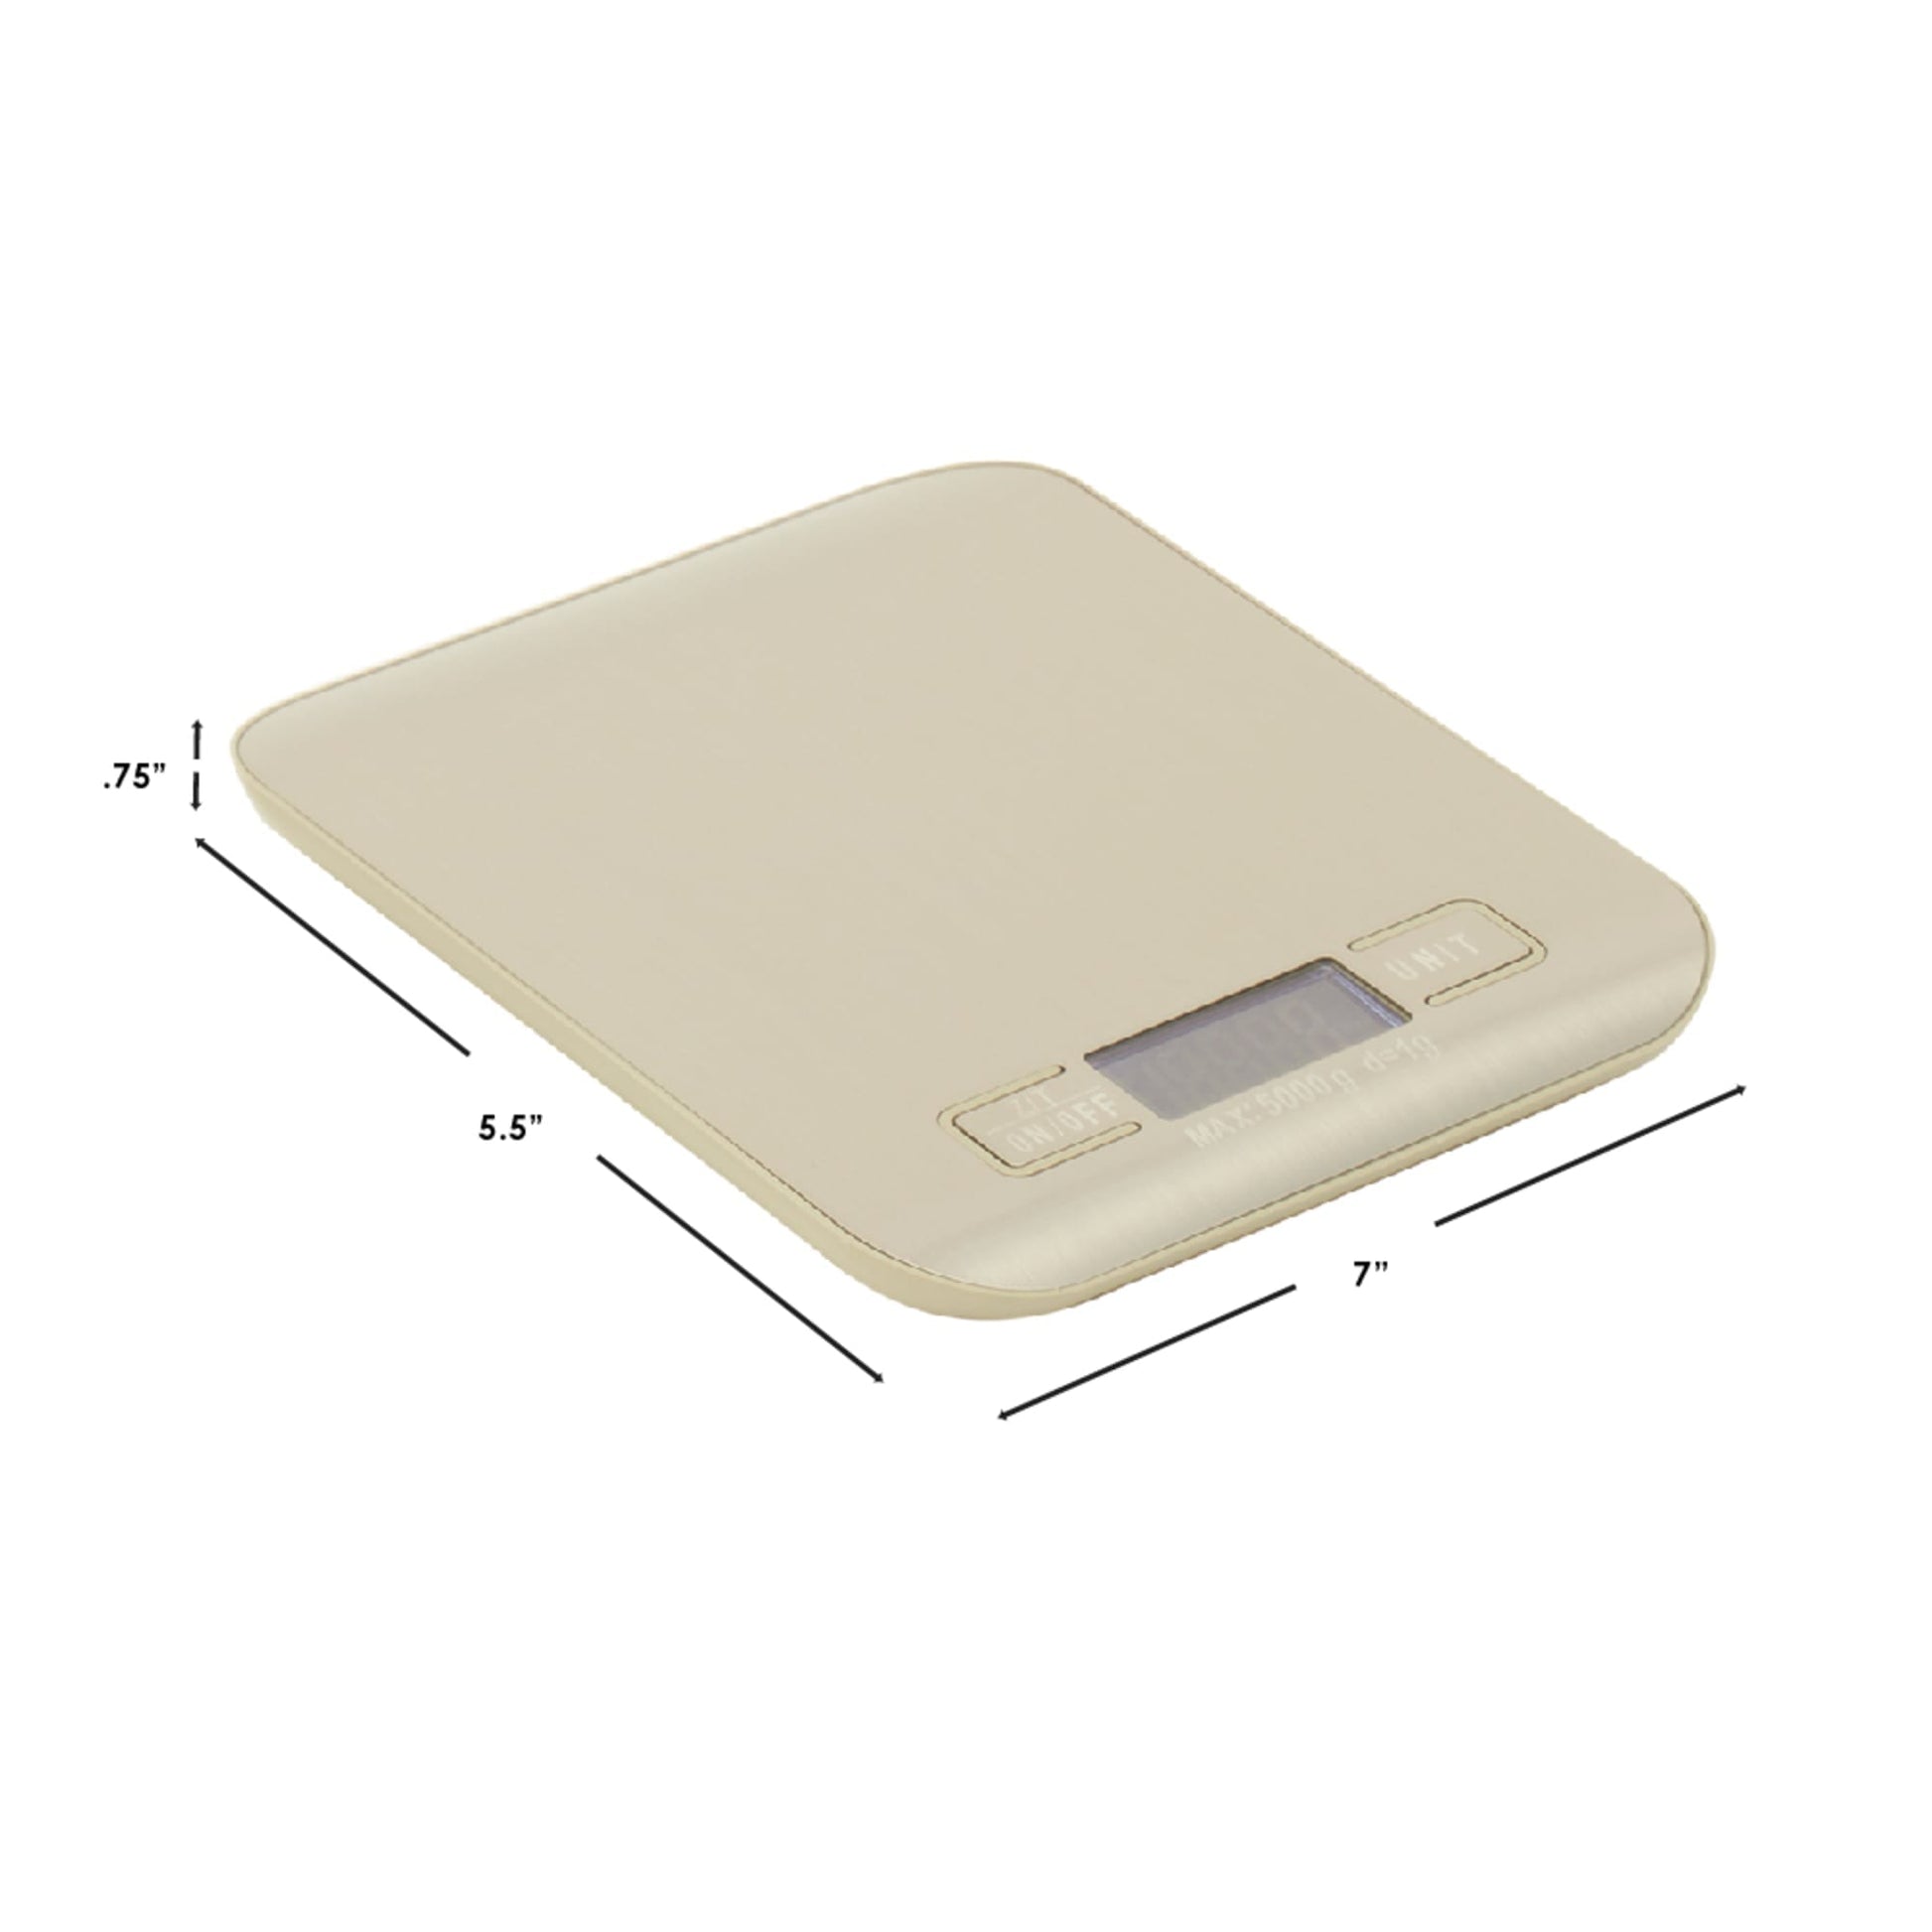 Digital food scale for diet, kitchen scale 5kg capacity stainless steel,  digital kitchen scale